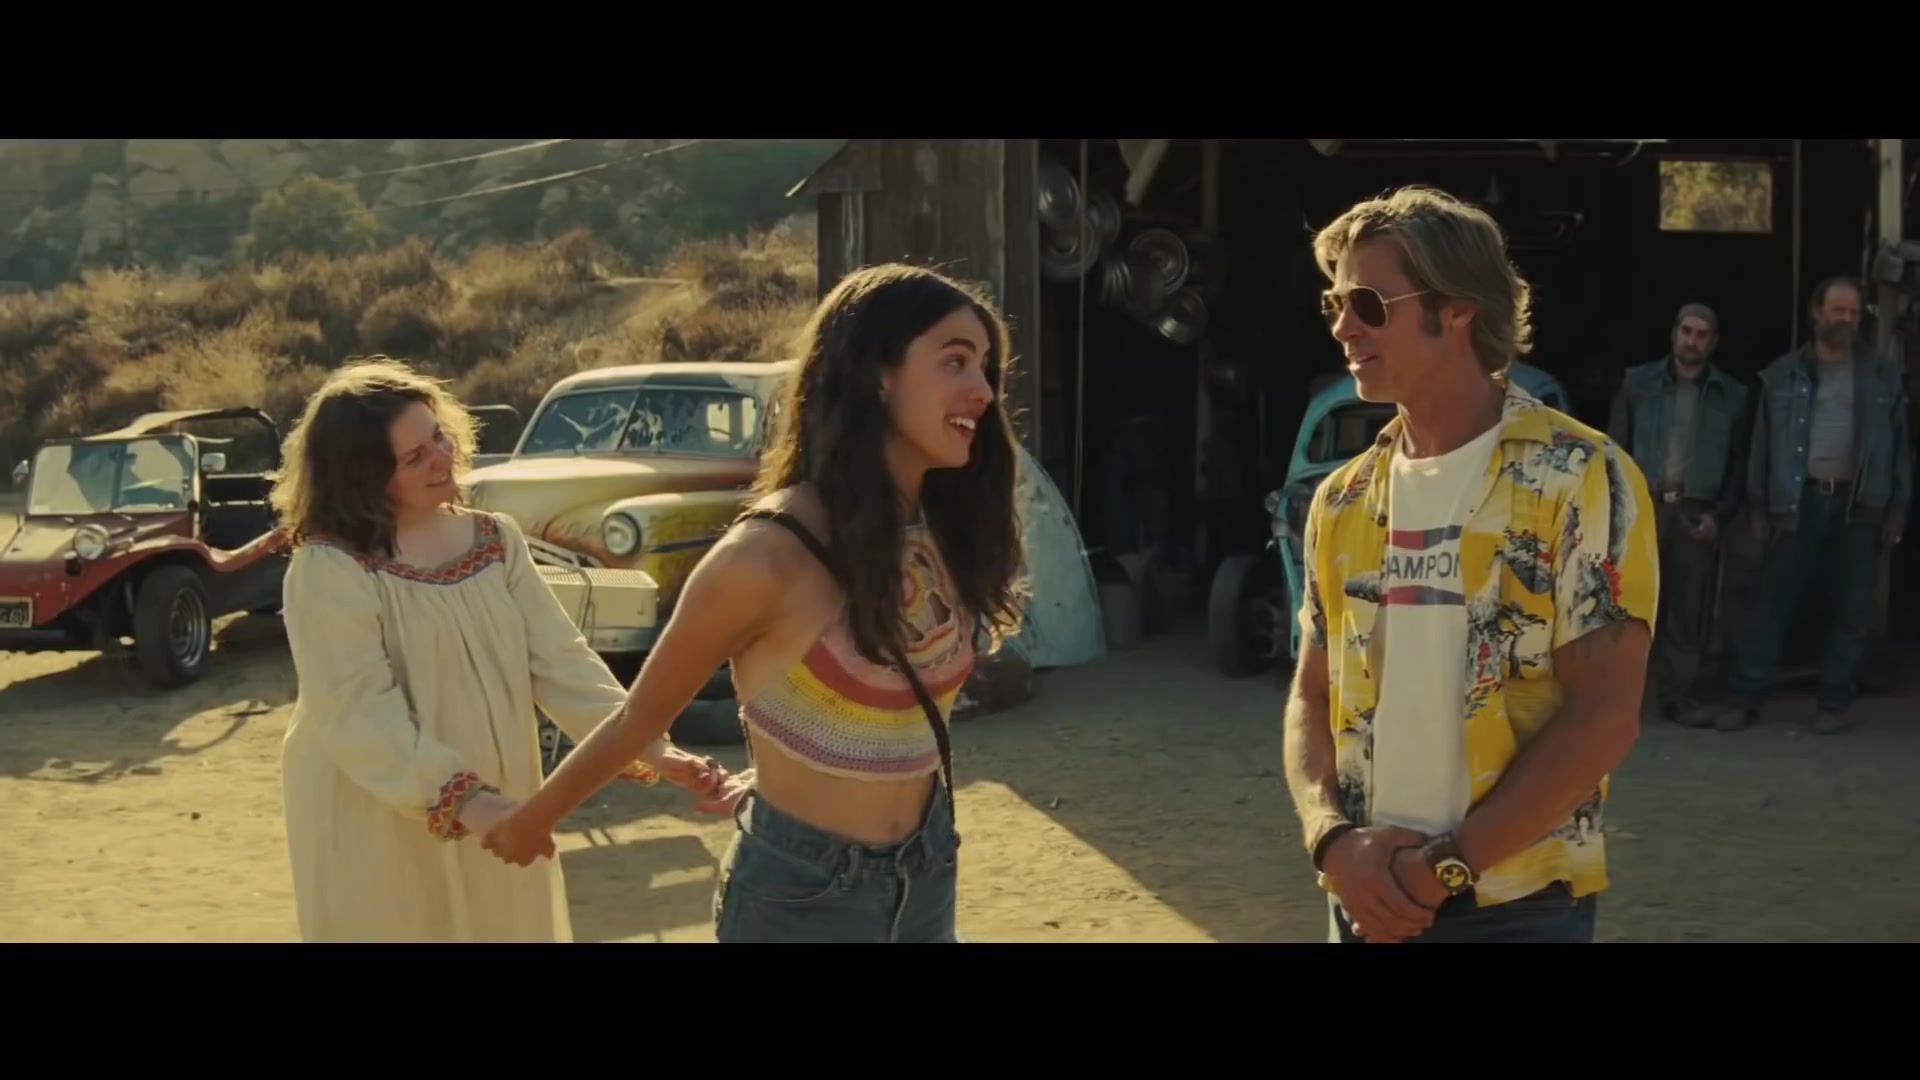 champion shirt from once upon a time in hollywood